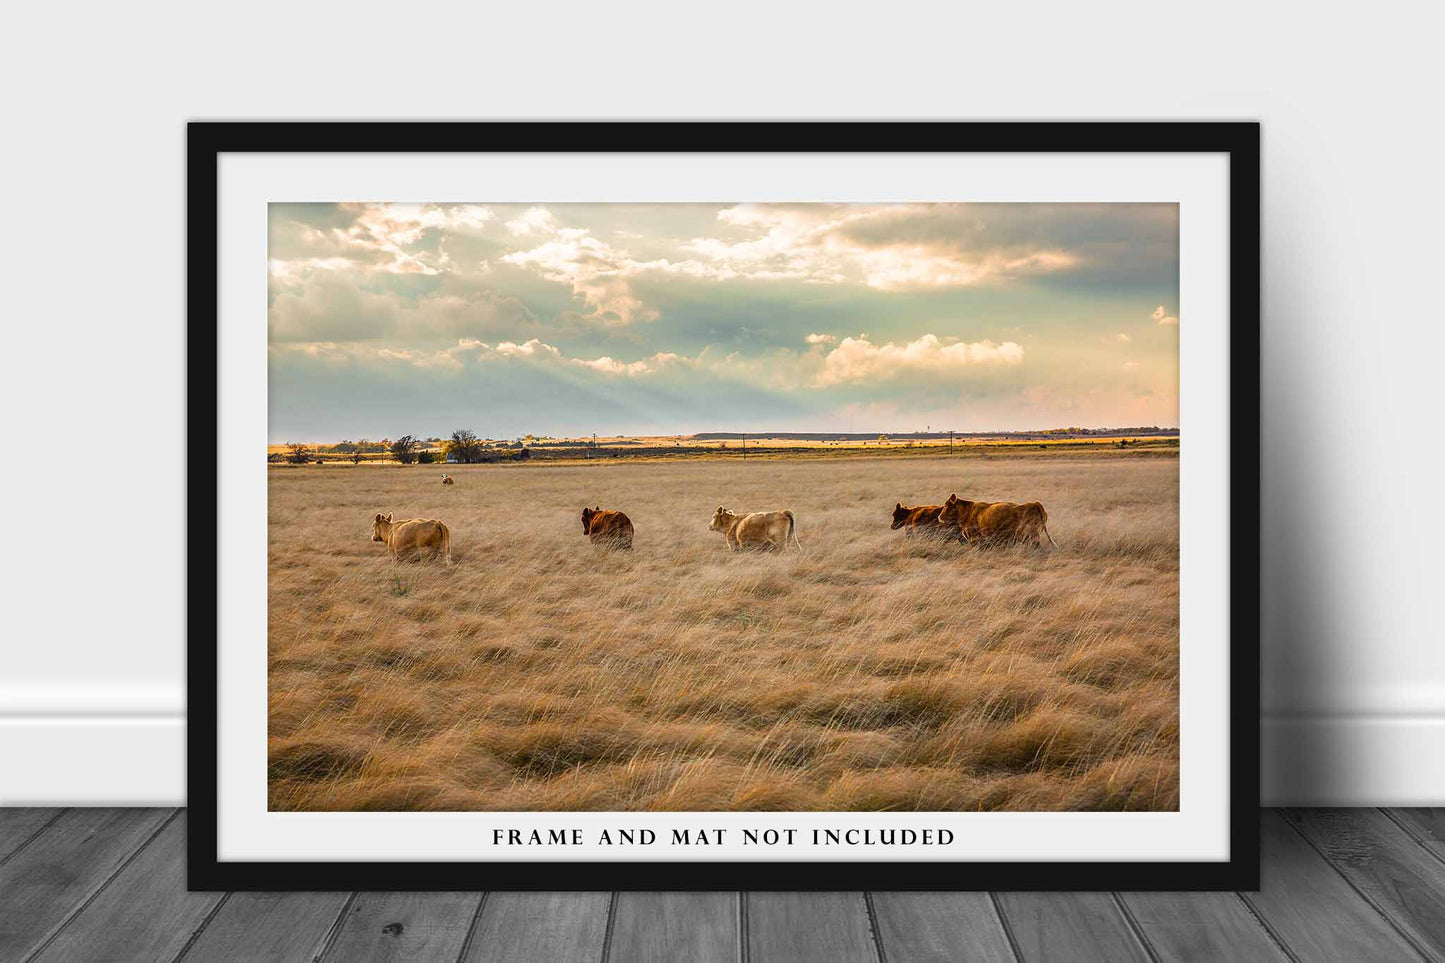 Cow Photography Art Print - Fine Art Picture of Cattle Wading Through Grass in Texas Panhandle on Late Autumn Day Western Wall Art Photo